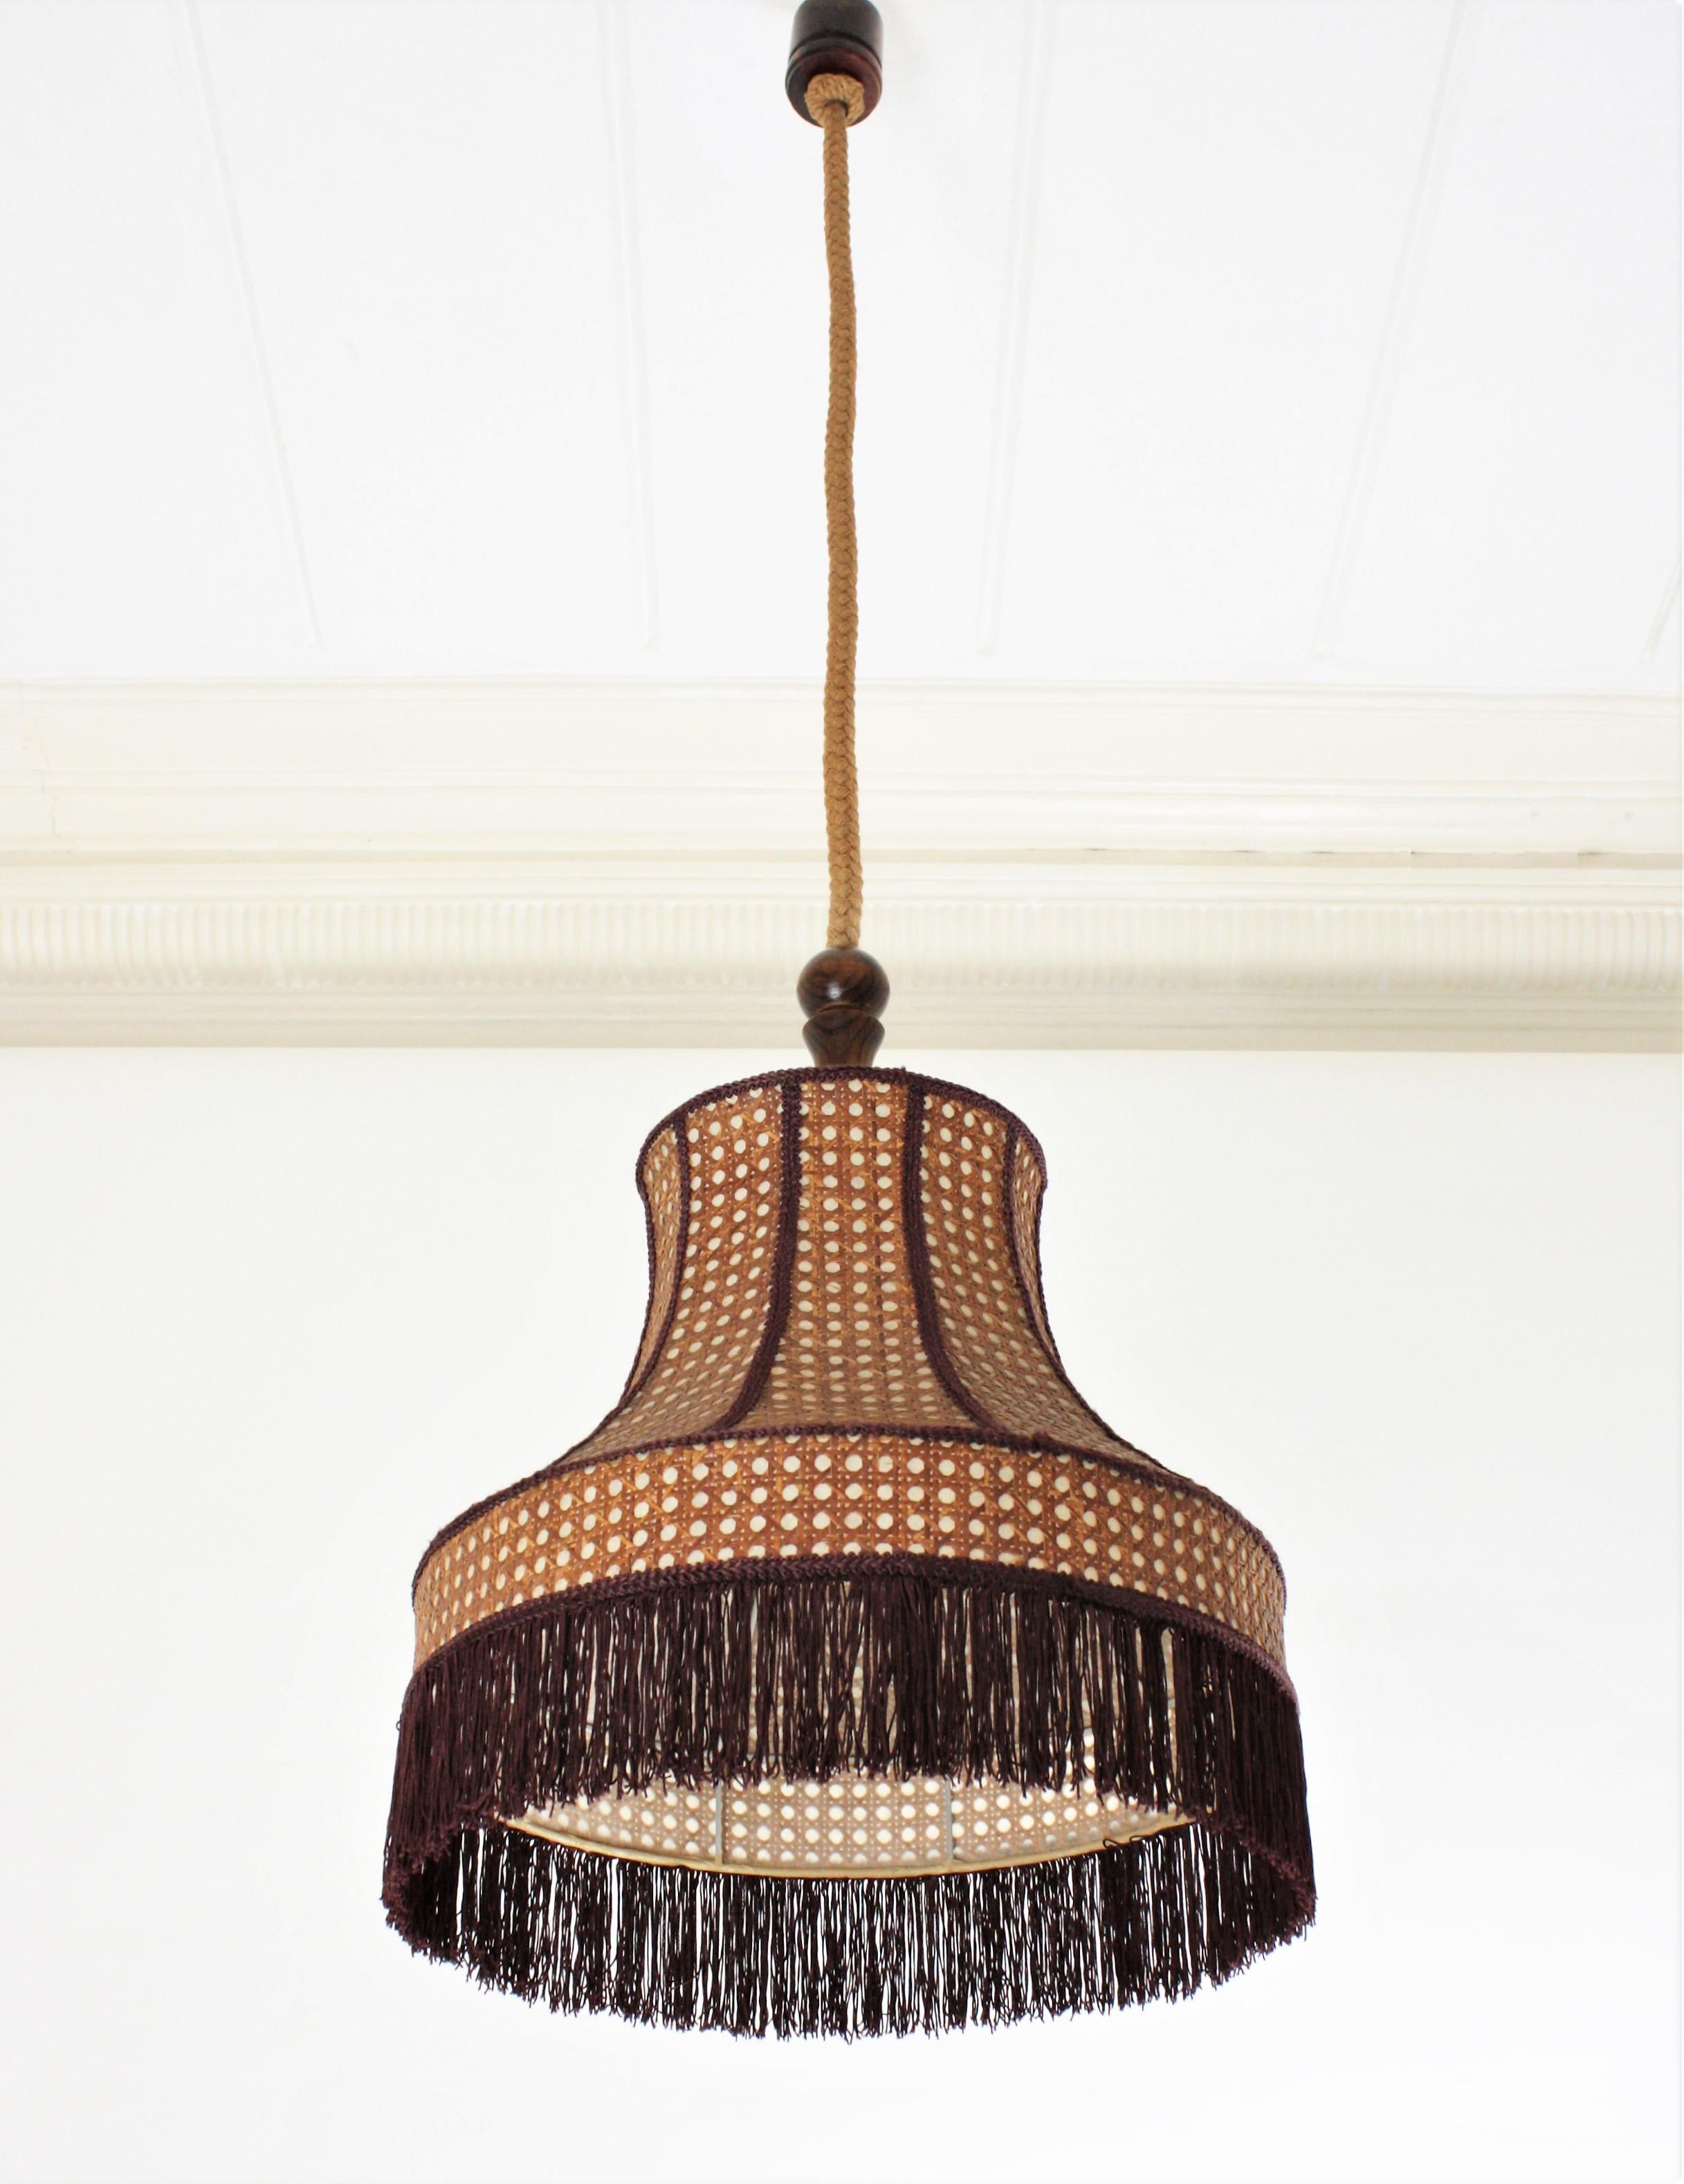 20th Century Rattan Wicker Pendant Hanging Lamp with Pagoda Shape and Fringed Bottom